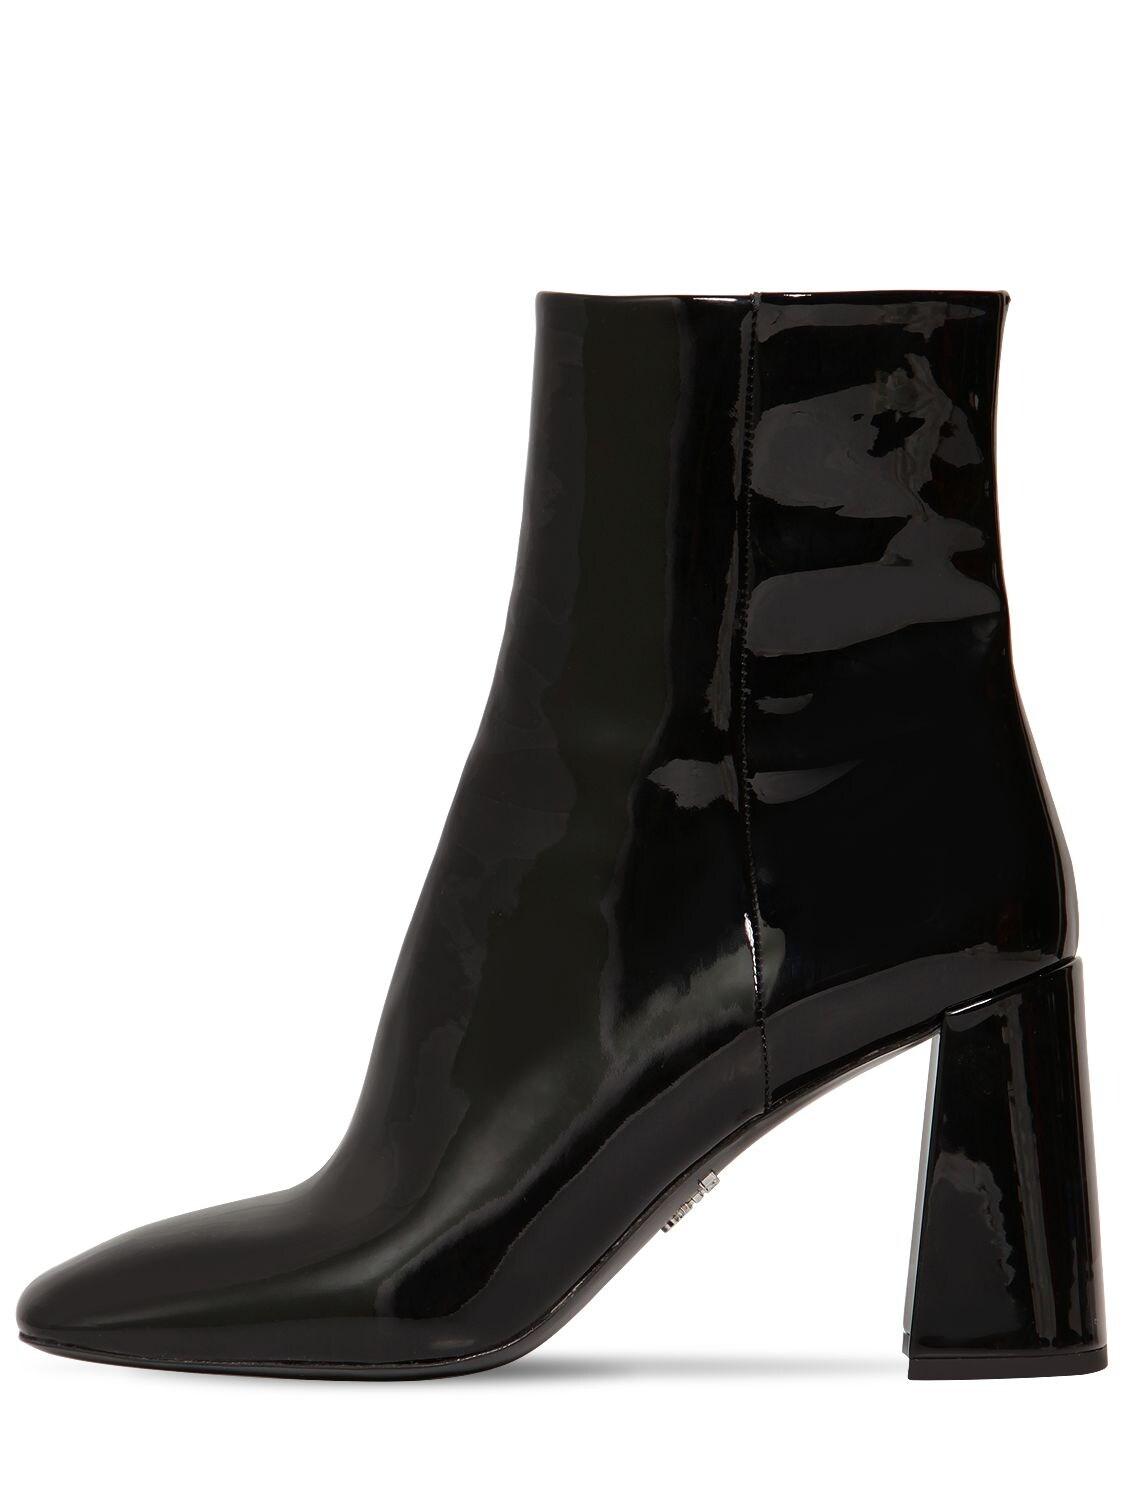 Prada 85mm Patent Leather Ankle Boots in Nero (Black) - Lyst